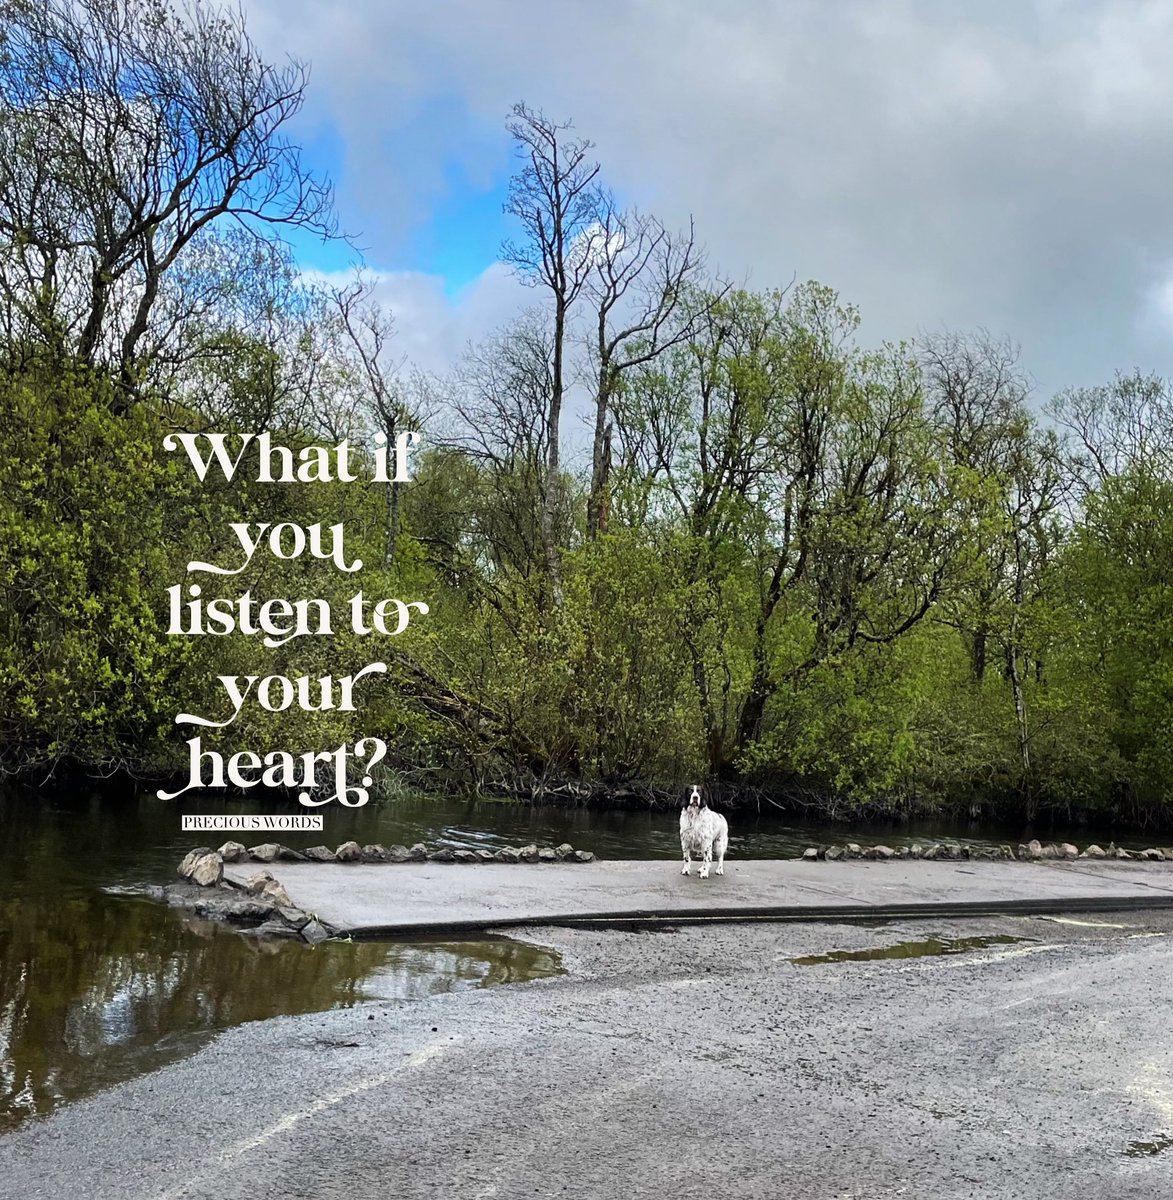 What if you listen to your heart?
#listentoyourheart #listen #whatif #preciouswords #preciouswordstoliveby